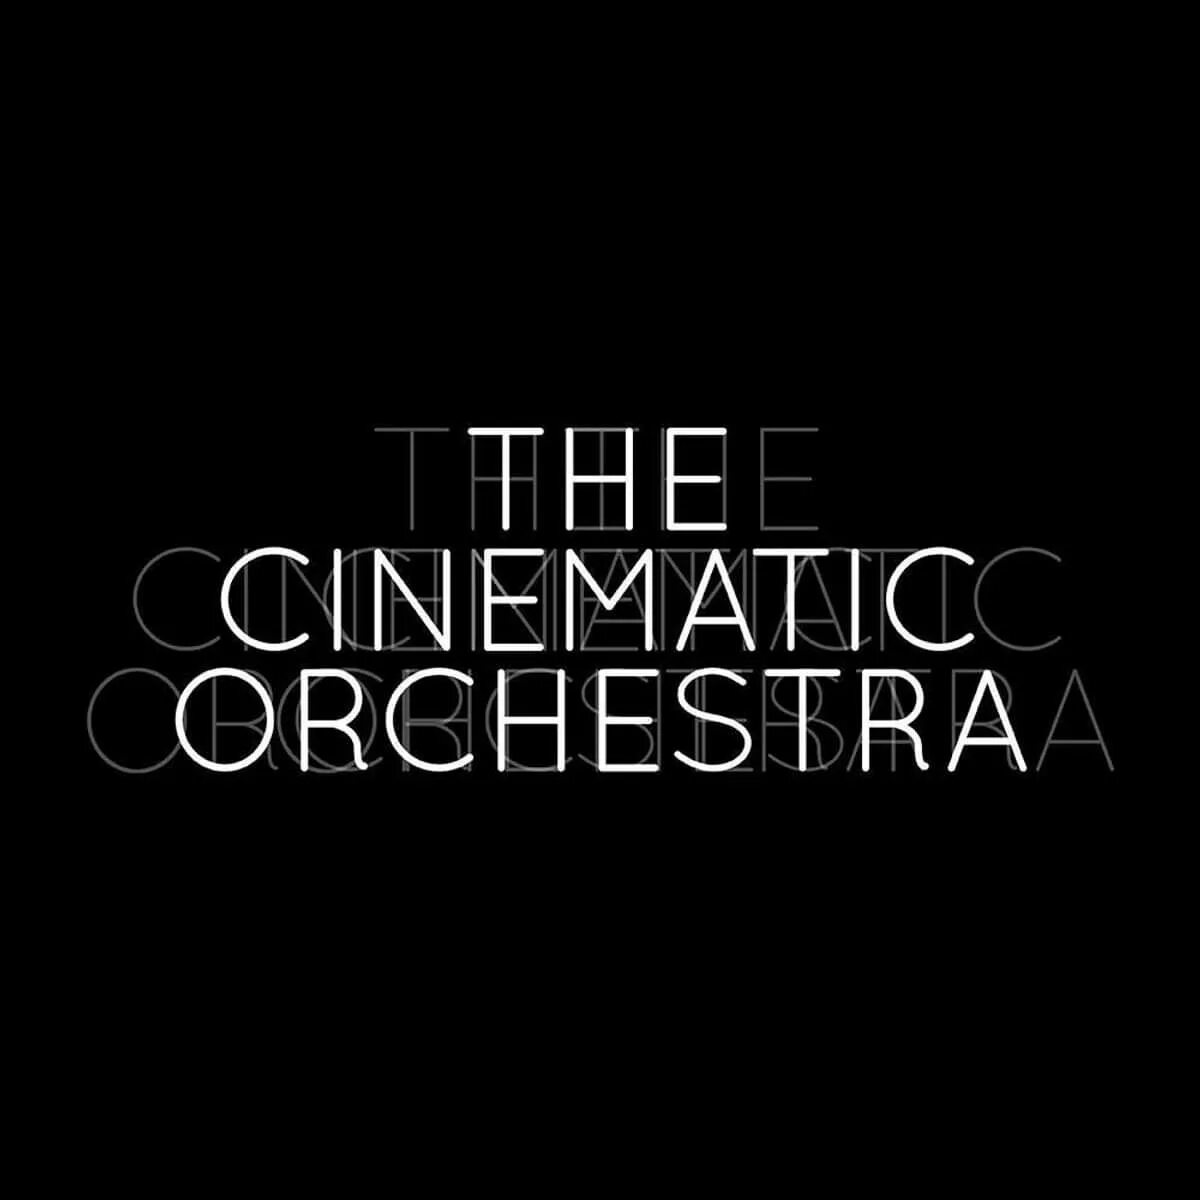 The cinematic orchestra to build a home. The Cinematic Orchestra. The Cinematic Orchestra фото. To build a Home the Cinematic Orchestra. Cinematic Orchestra to believe.